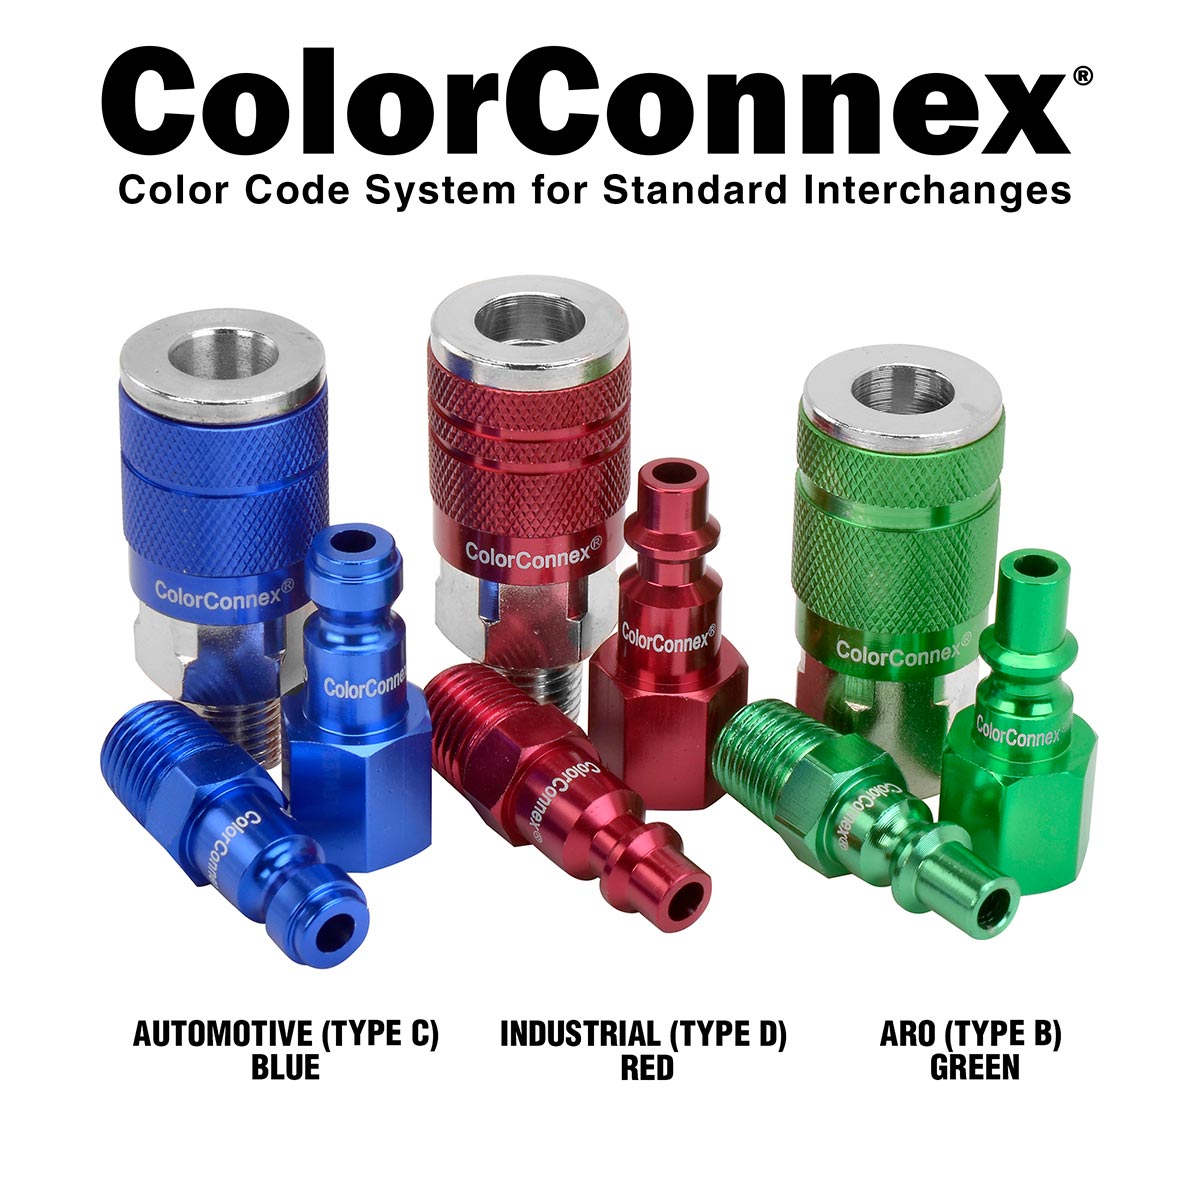 Colorconnex® Coupler And Plug Kit Type D 1/4" Npt 1/4" Body Red 7-piece